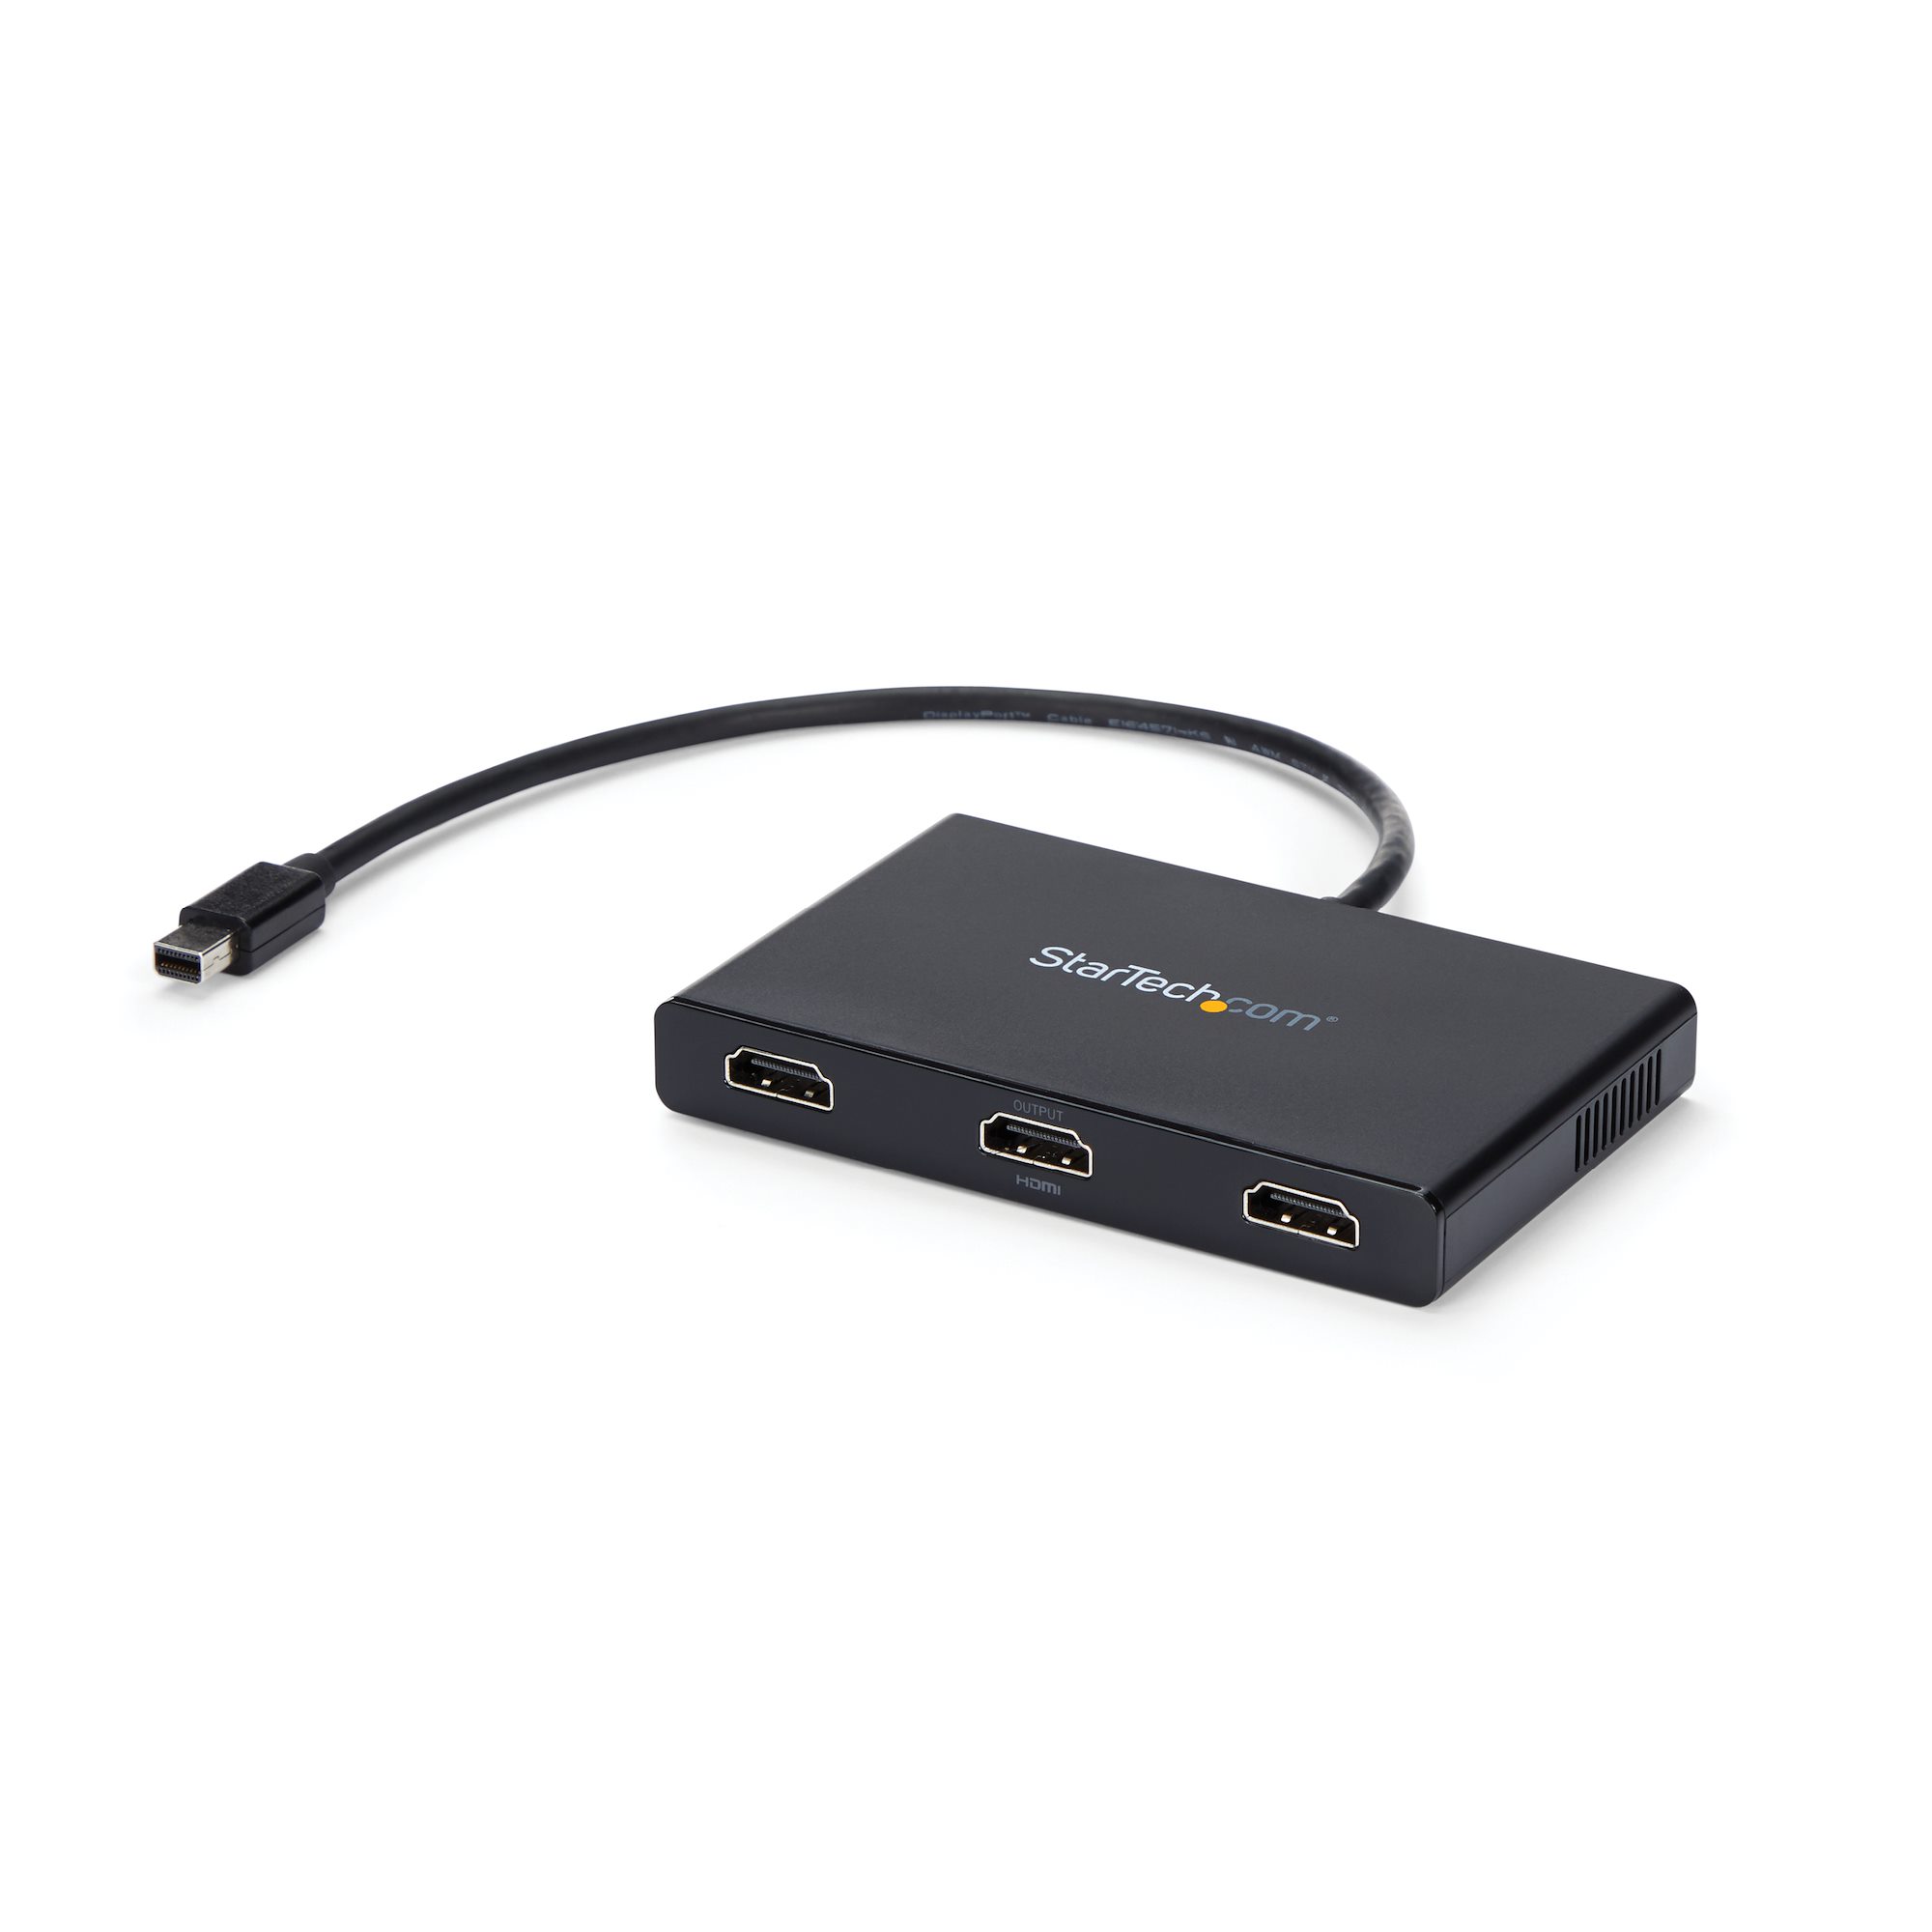 HDMI Splitter 1 In 2 Out Cable Adapter Converter 1080P Multi